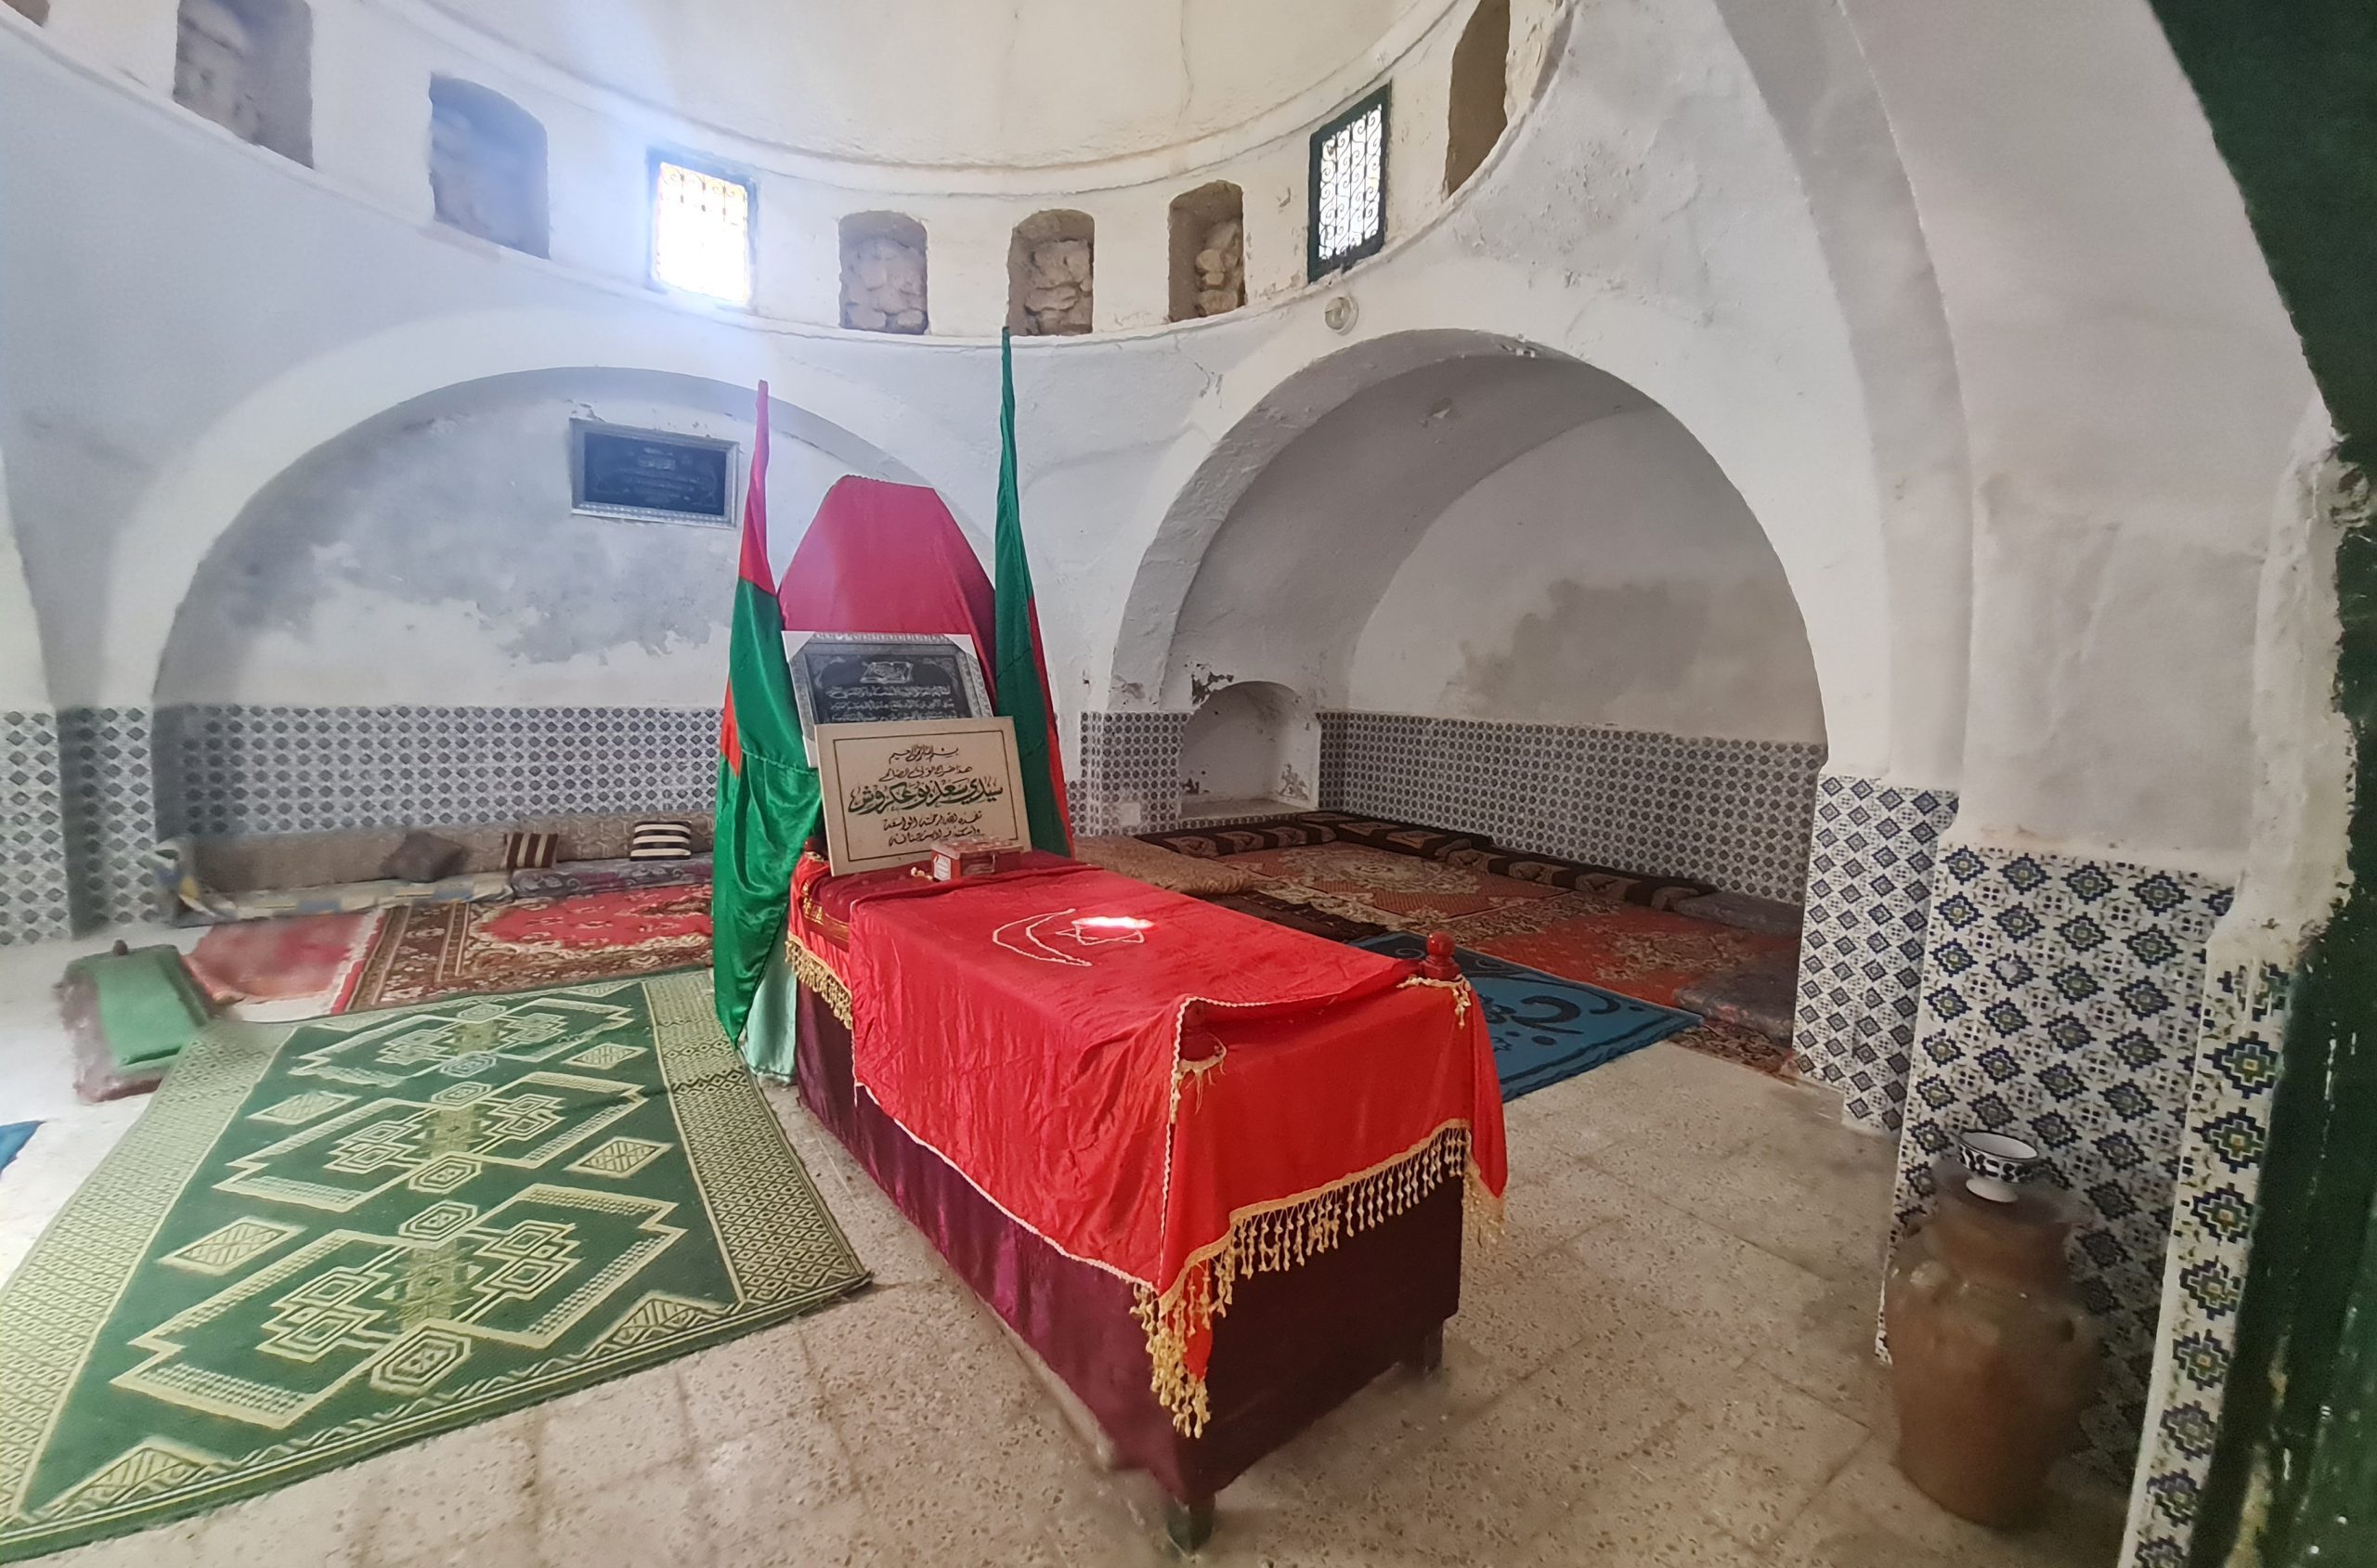 Fig. 8. The tomb of Sidi Saâd Bouakrouche, one of the Black Saints revered in Tunisia (Photo Saoussen Nighaoui).